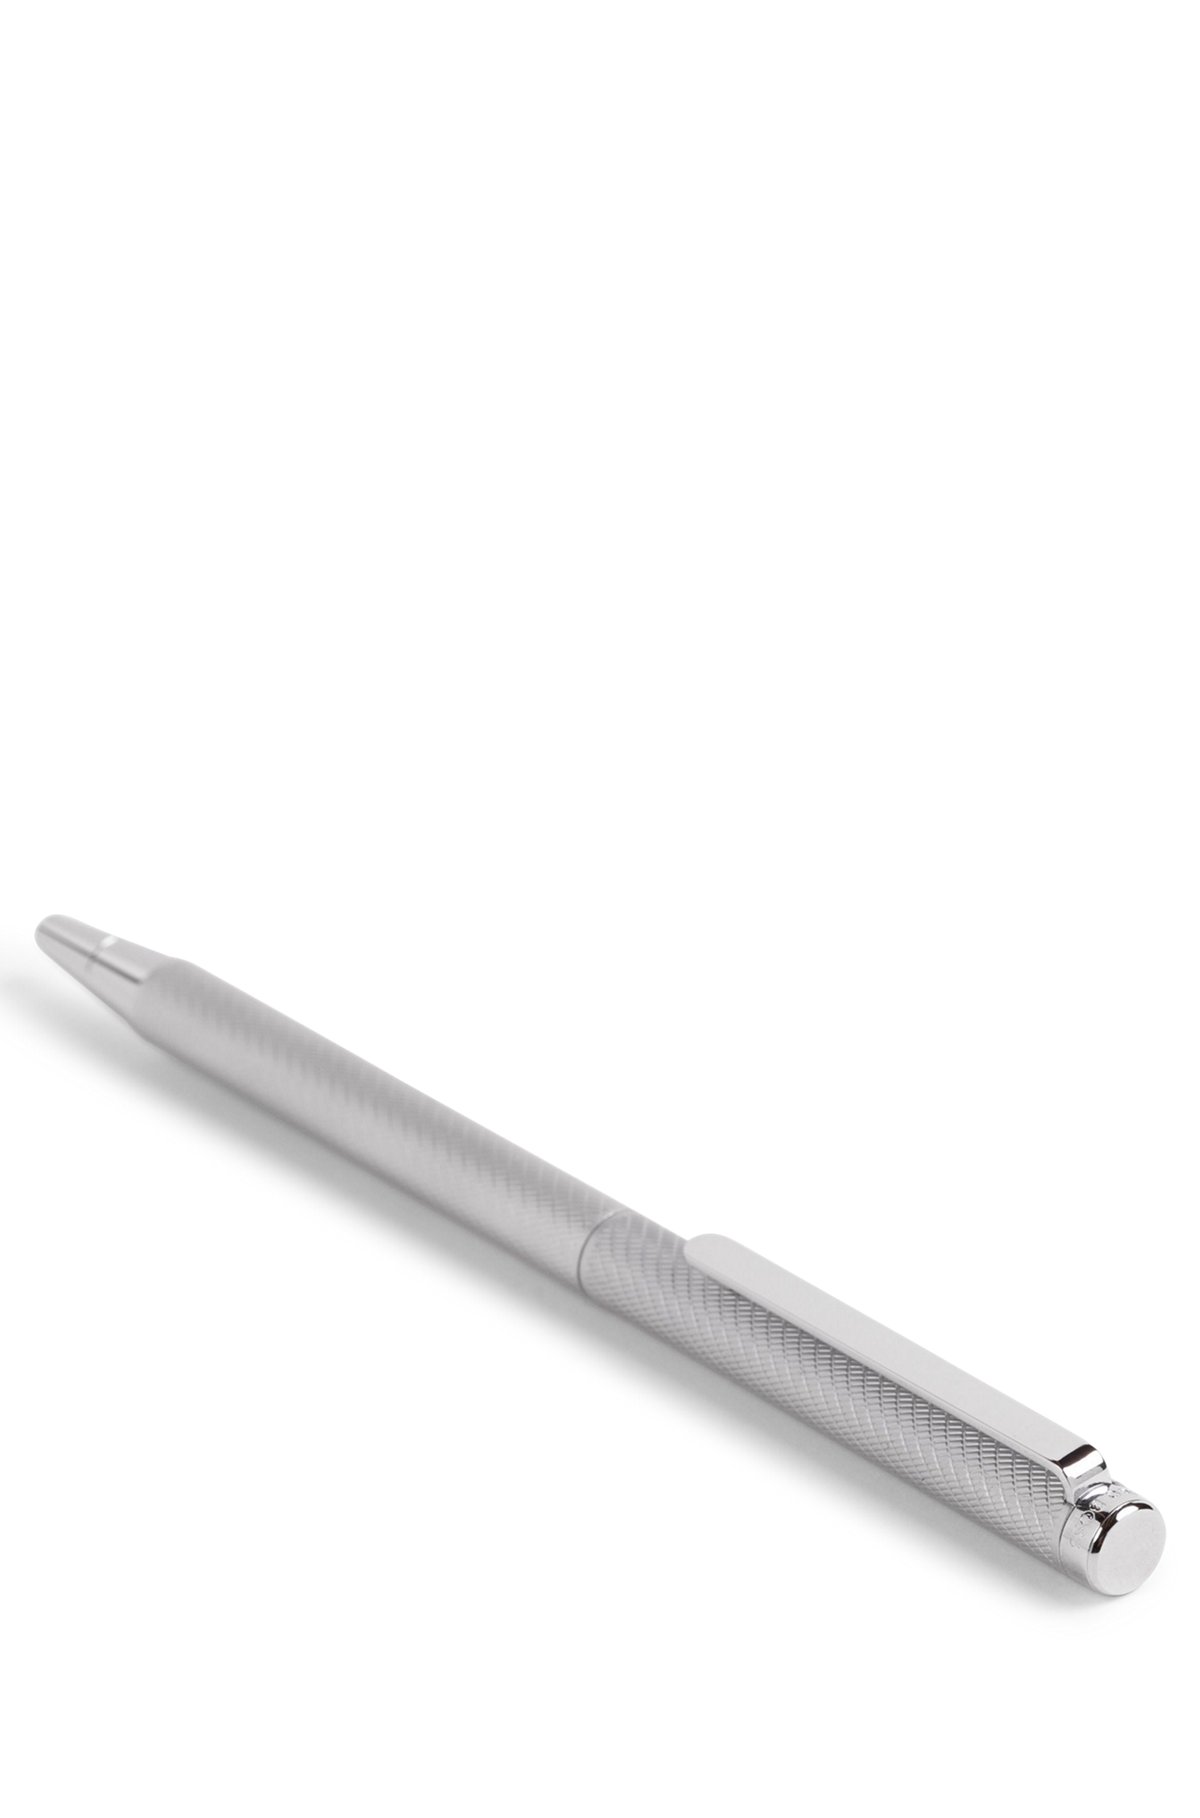 Chrome ballpoint pen with engraved pattern, Silver